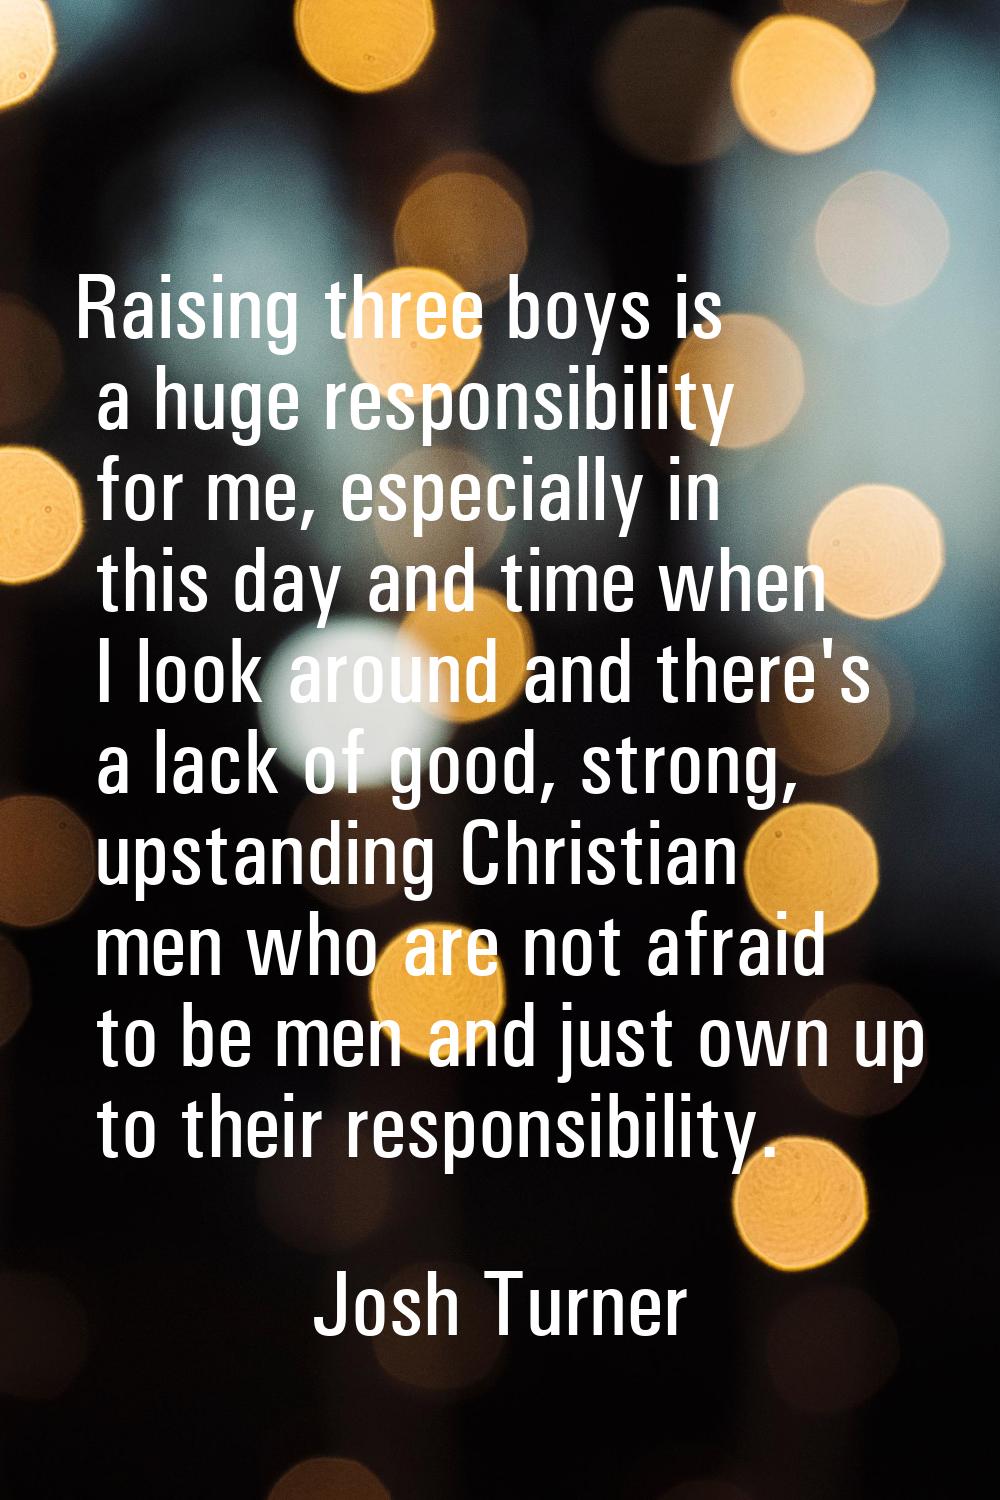 Raising three boys is a huge responsibility for me, especially in this day and time when I look aro